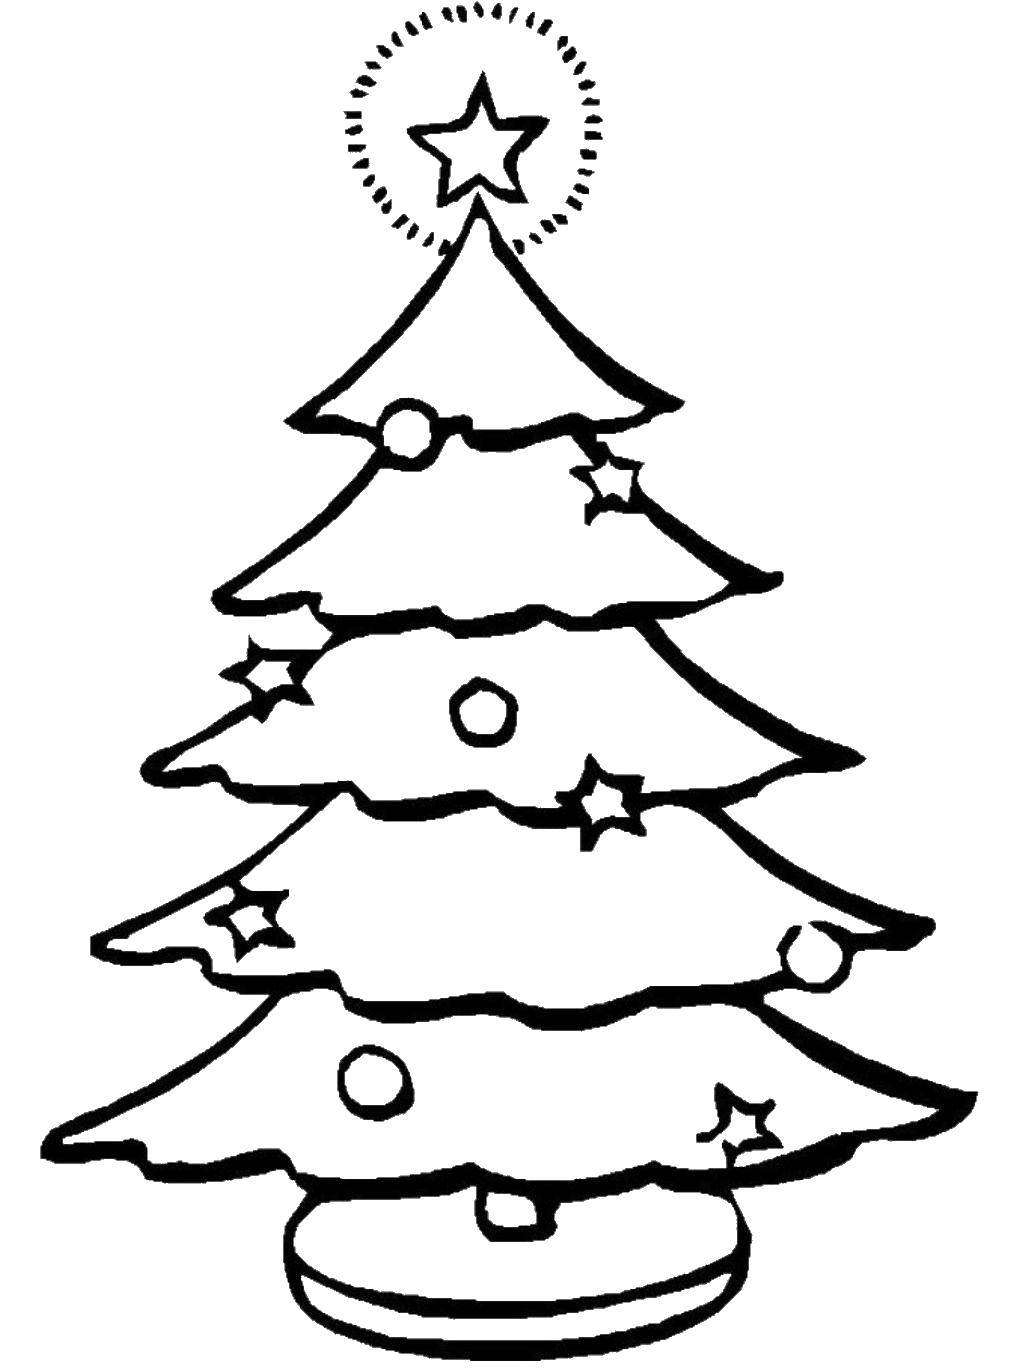 Coloring Decorated Christmas tree on new year. Category coloring Christmas tree. Tags:  tree.